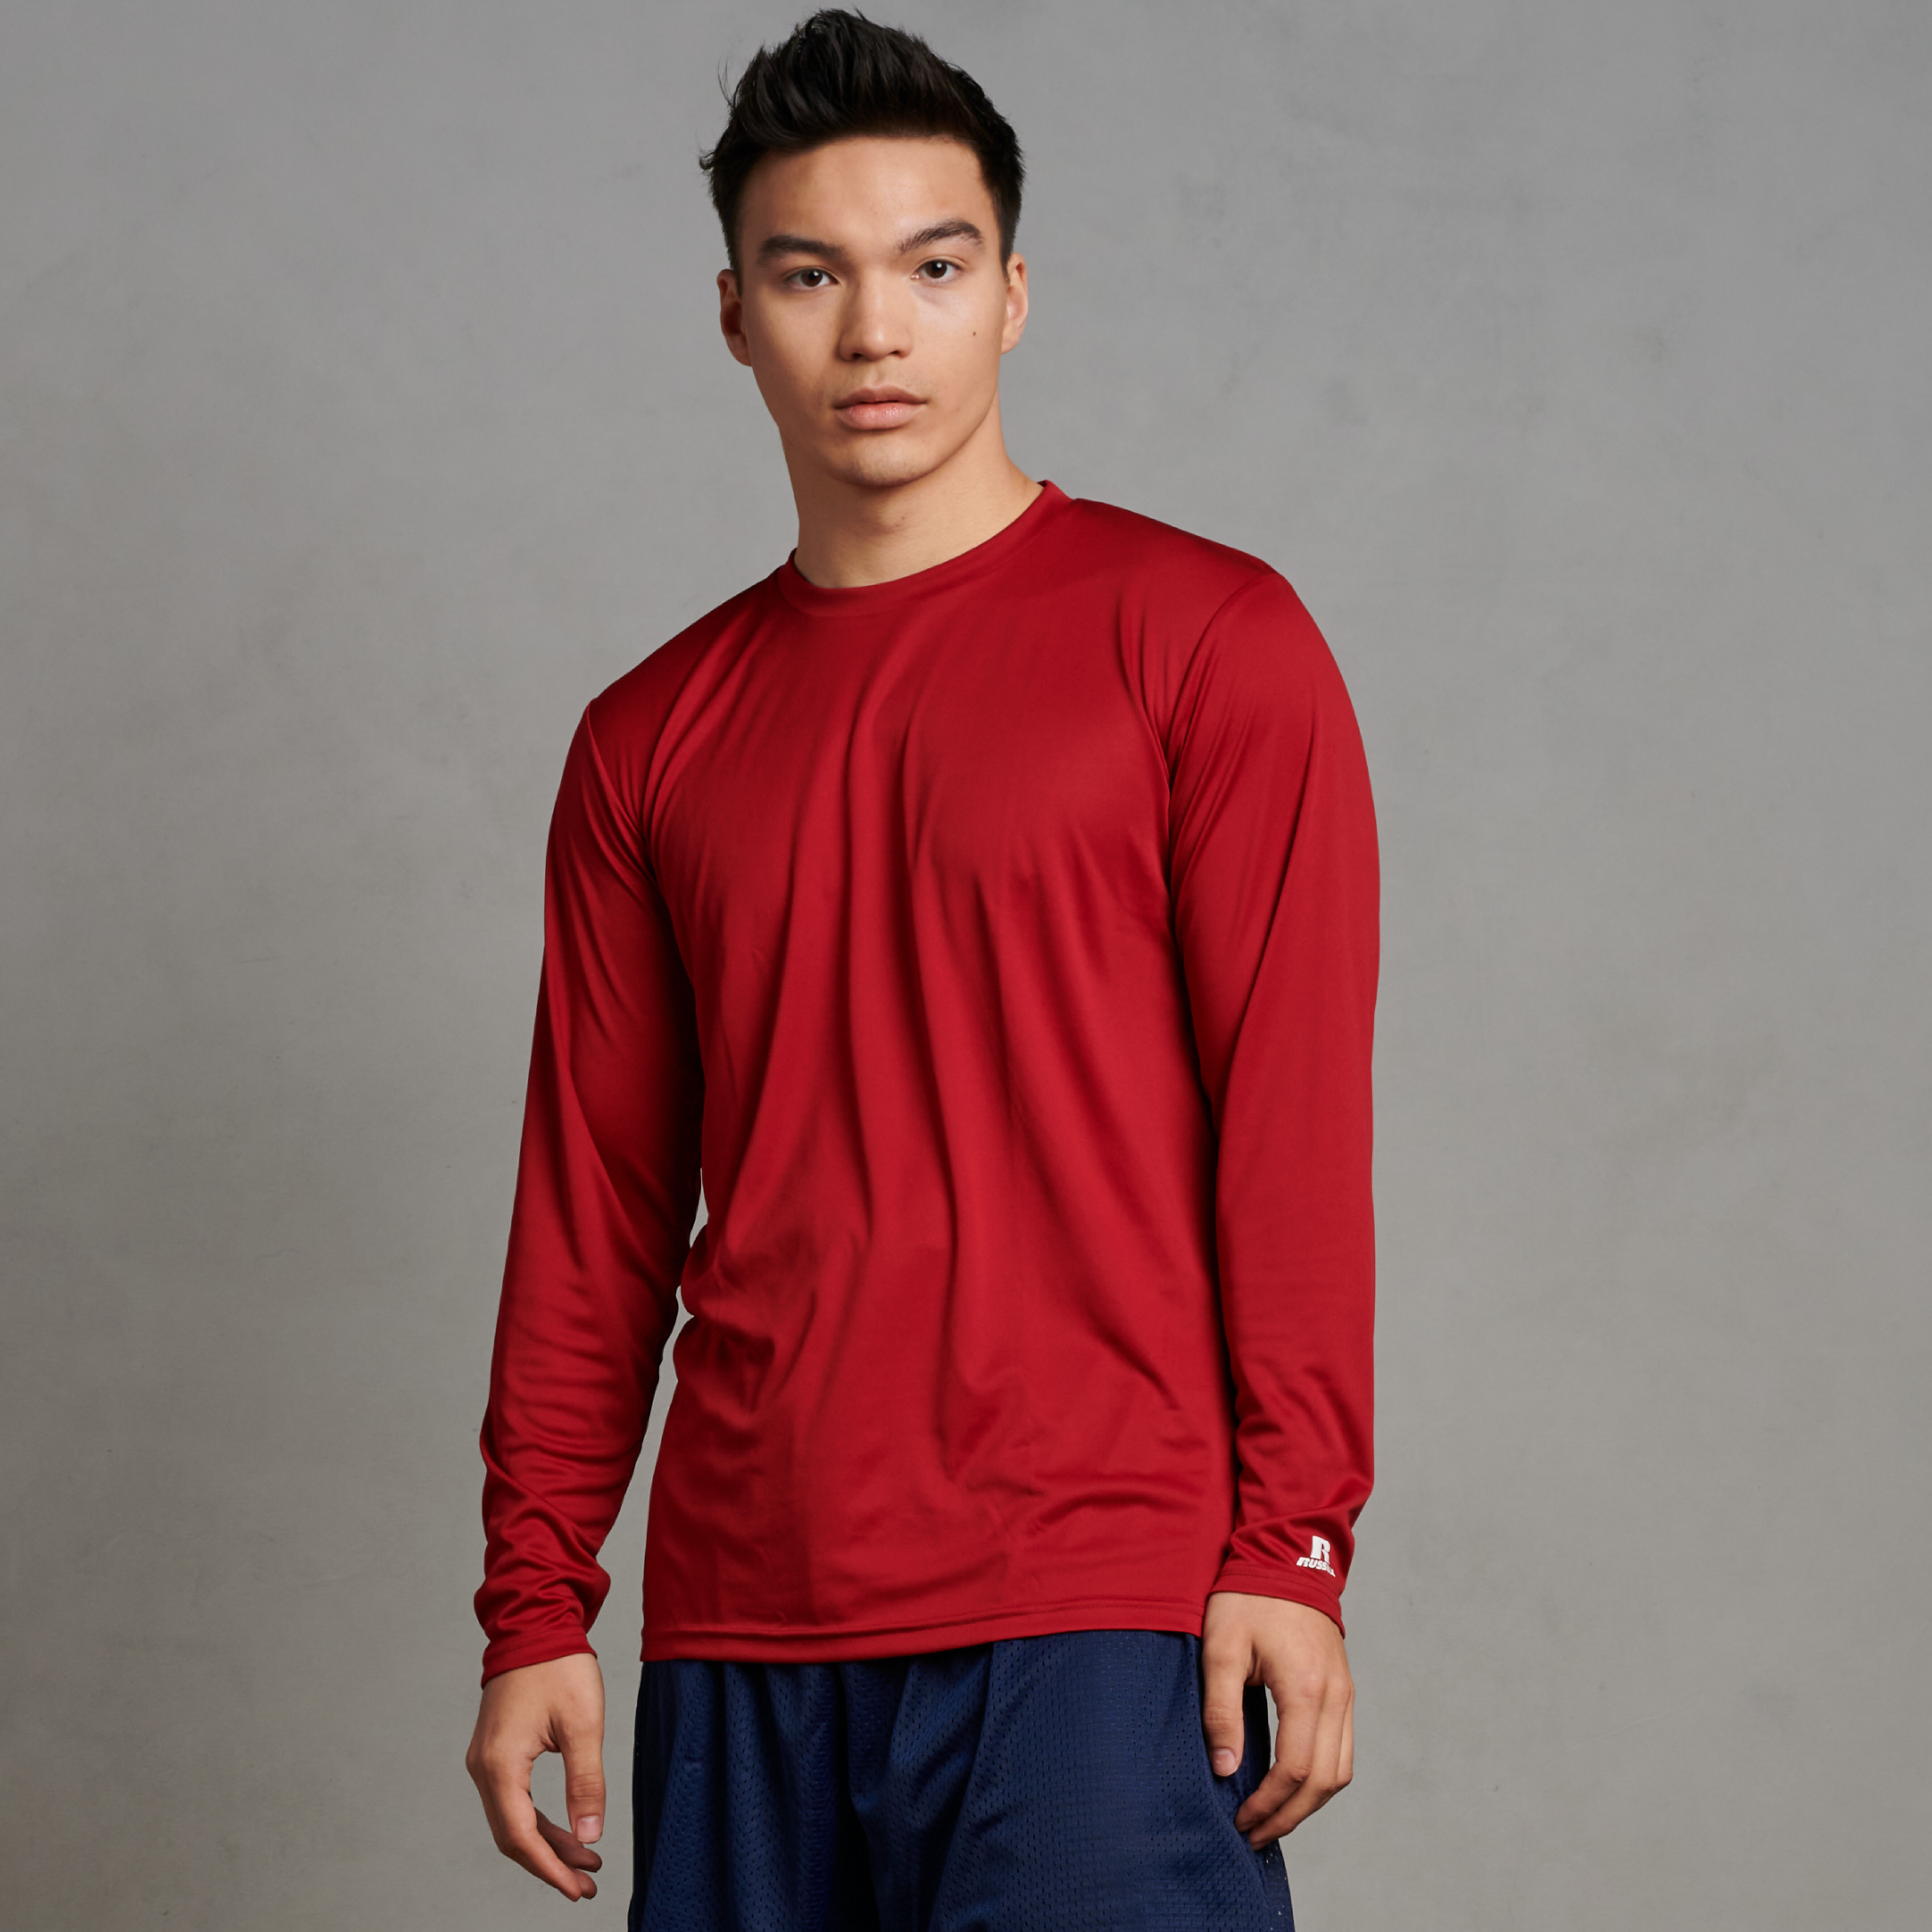 Men's Athletic Shirts & Sports Clothing | Russell Athletic